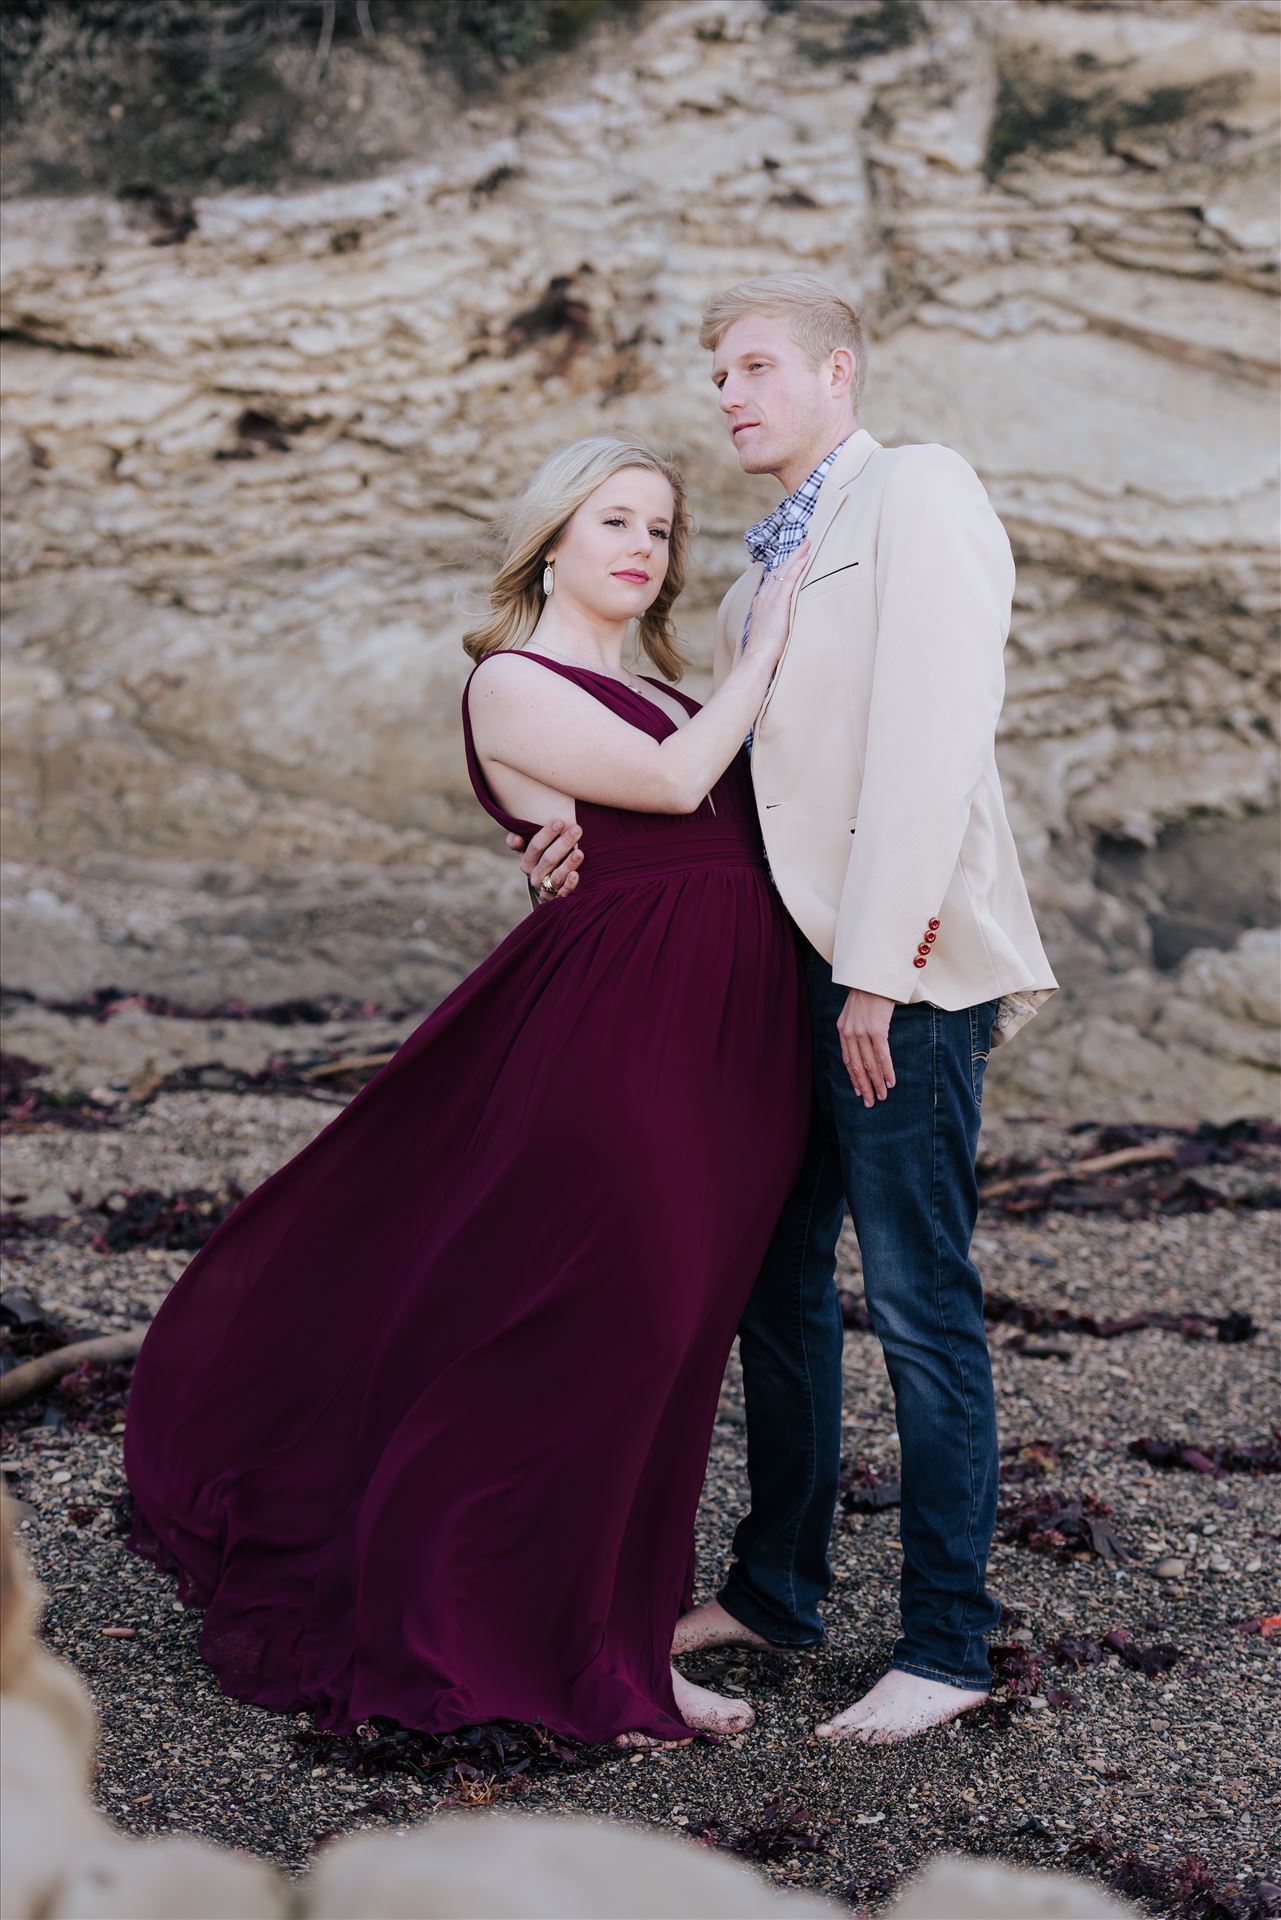 DSC_2301.JPG - San Luis Obispo and Santa Barbara County Wedding and Engagement Photography. Mirror's Edge Photography captures Montana de Oro Engagement Session.  Romantic couple on the beach in love. by Sarah Williams